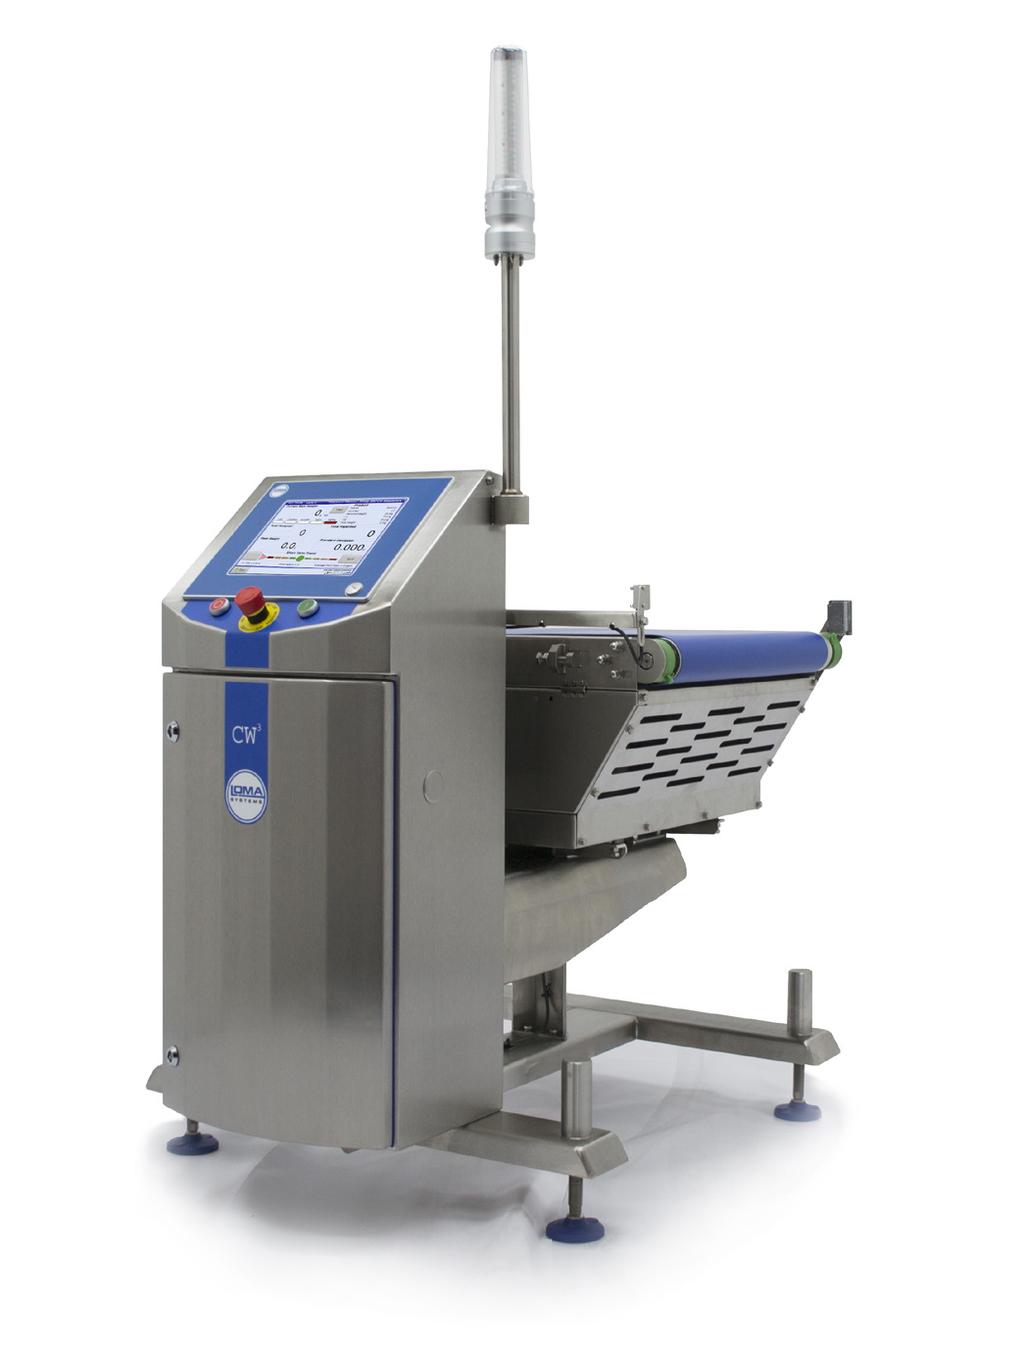 Checkweighing Systems LOMA s CW3 Checkweighing Systems provide in-line dynamic checkweighing capabilities in a compact package.